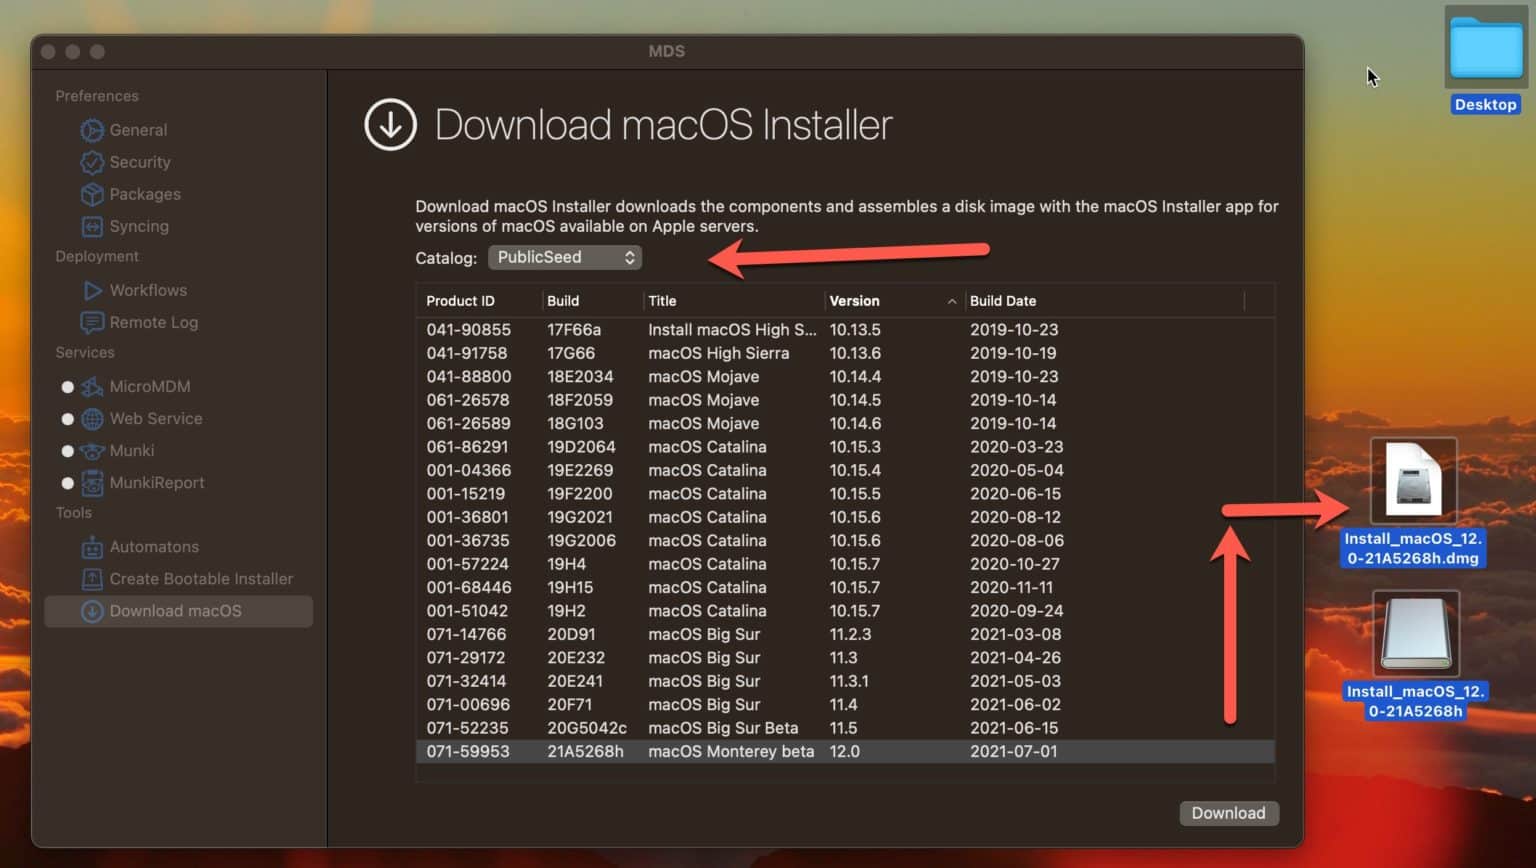 how to download macos dmg file on windows